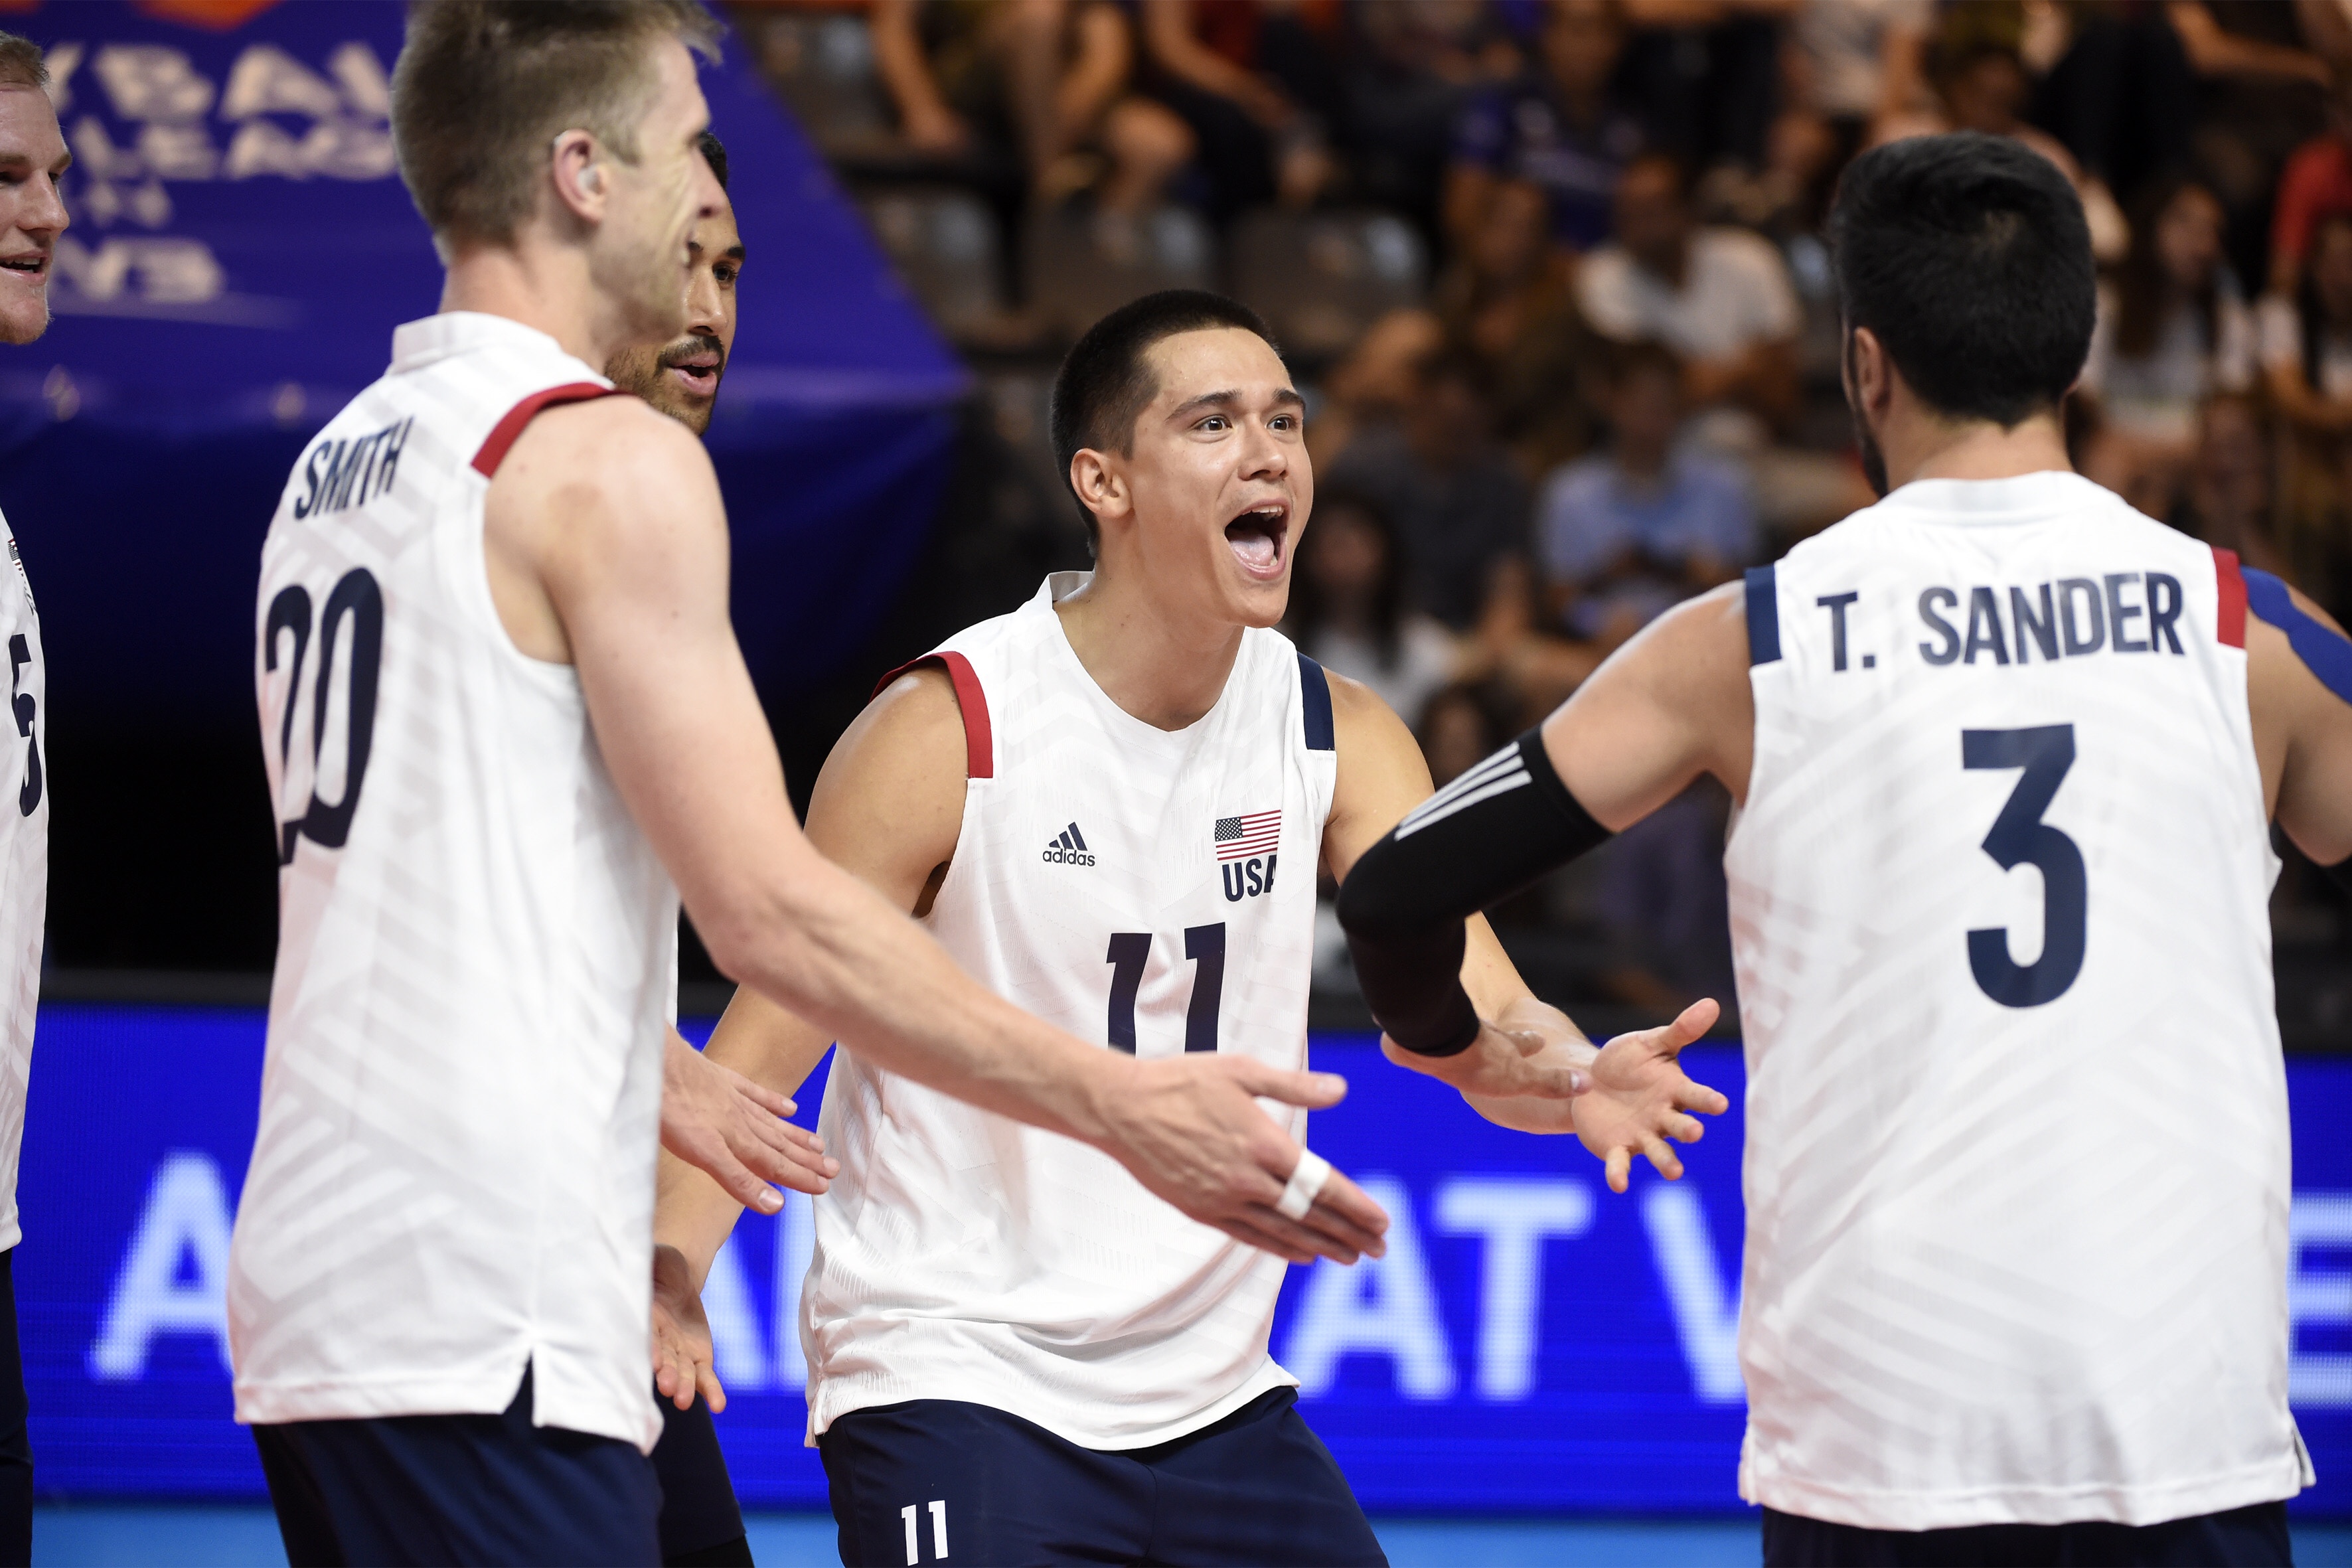 Top VNL players to know for U.S. home matches this weekend - Off the Block